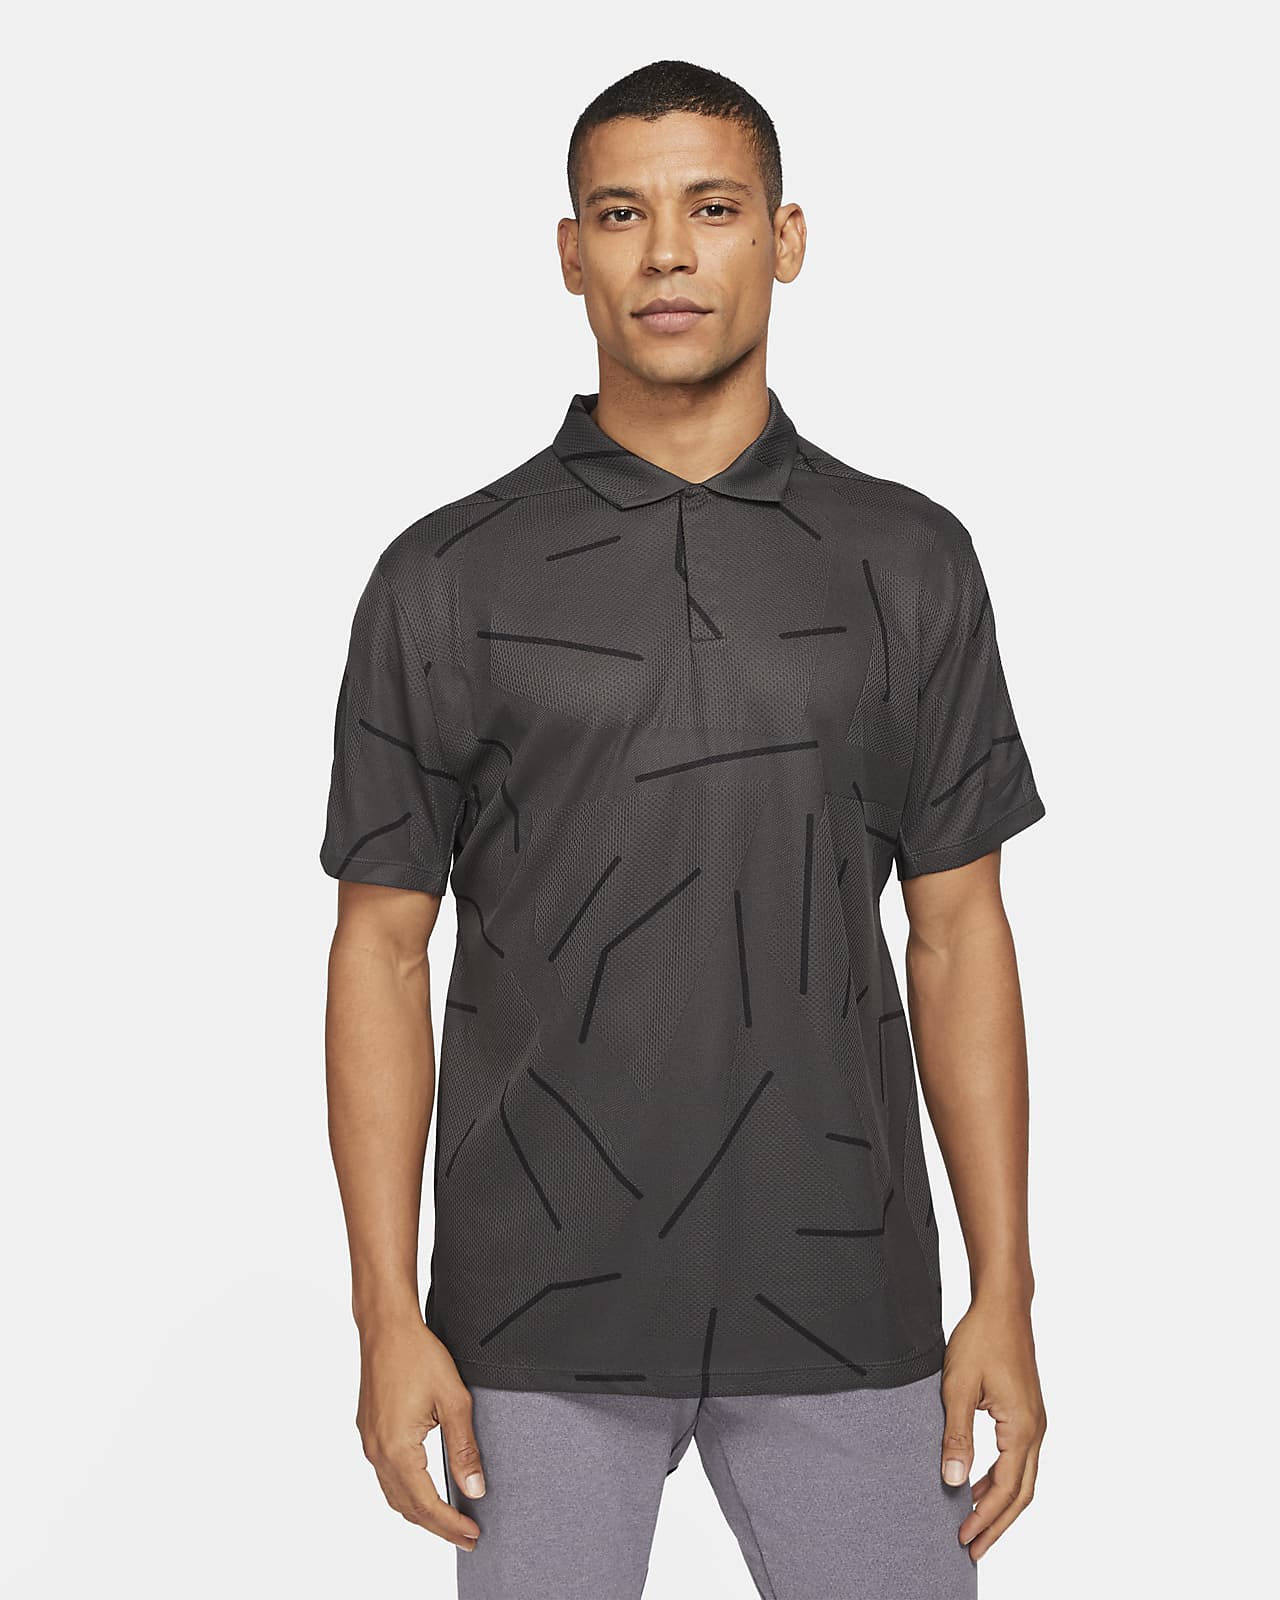 nike tiger woods golf polo